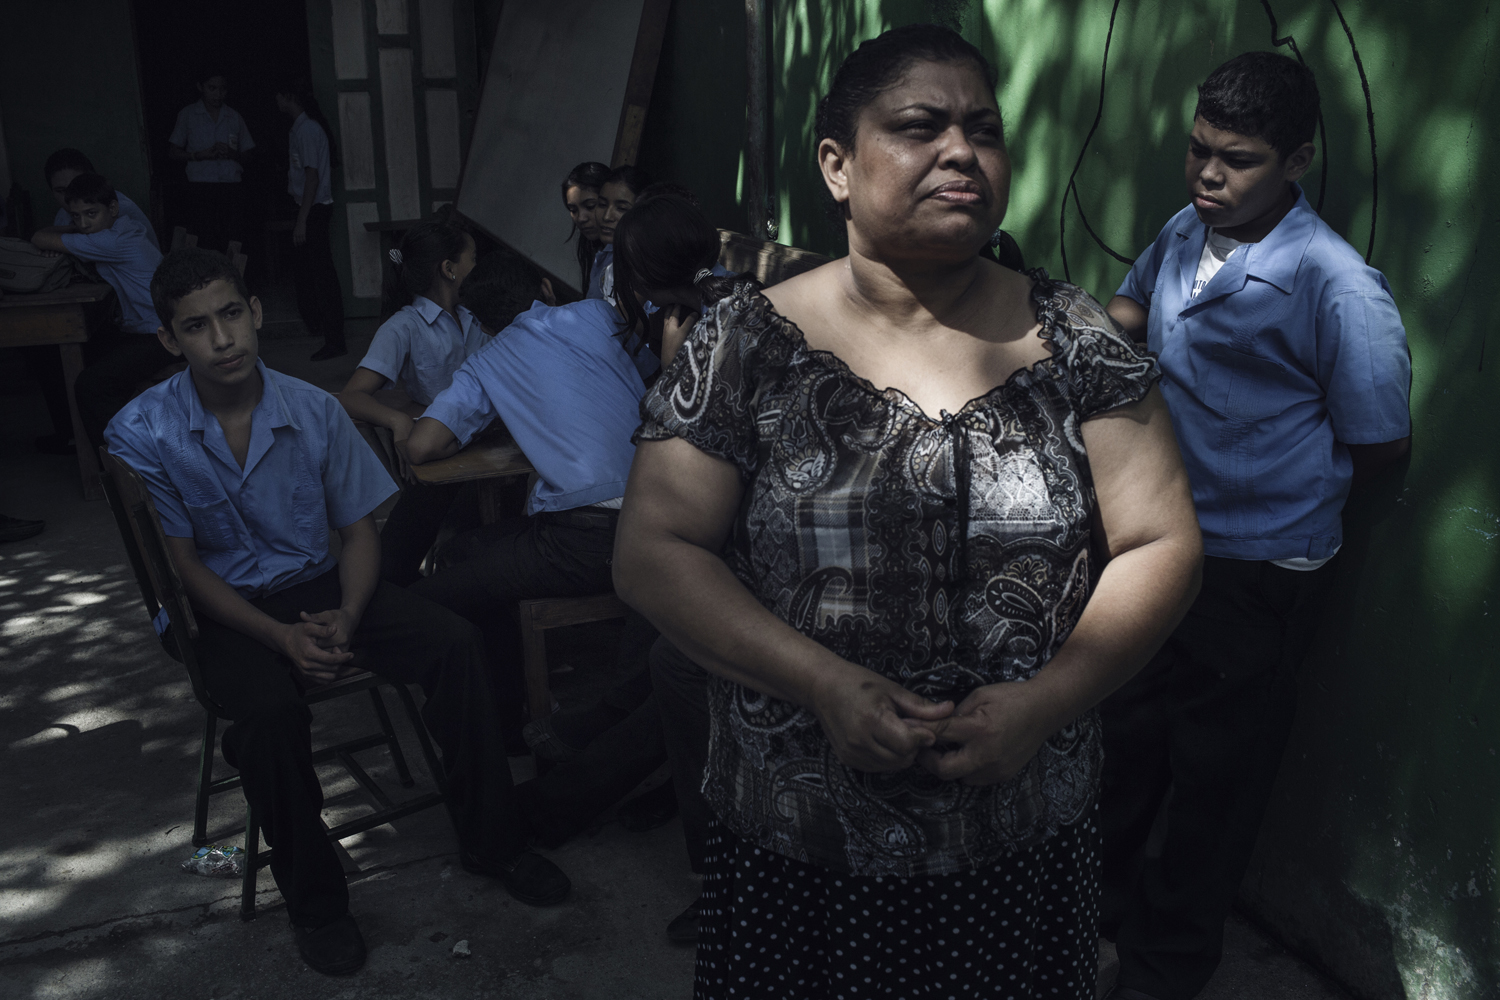 Martha Iris Triminio, 44, from Chamelecón, one of the toughest and most violent barrios in Latin America, sought to travel to the U.S. with her 14-year-old son, Roberto Carlos (left). In May, after she heard President Barack Obama was offering visas to Honduran minors, she set off on the migrant trail using a 'coyote' for help, paying more than $6,000 per person. She was deported from Mexico before she could finish the trip. Honduras. July 16, 2014.